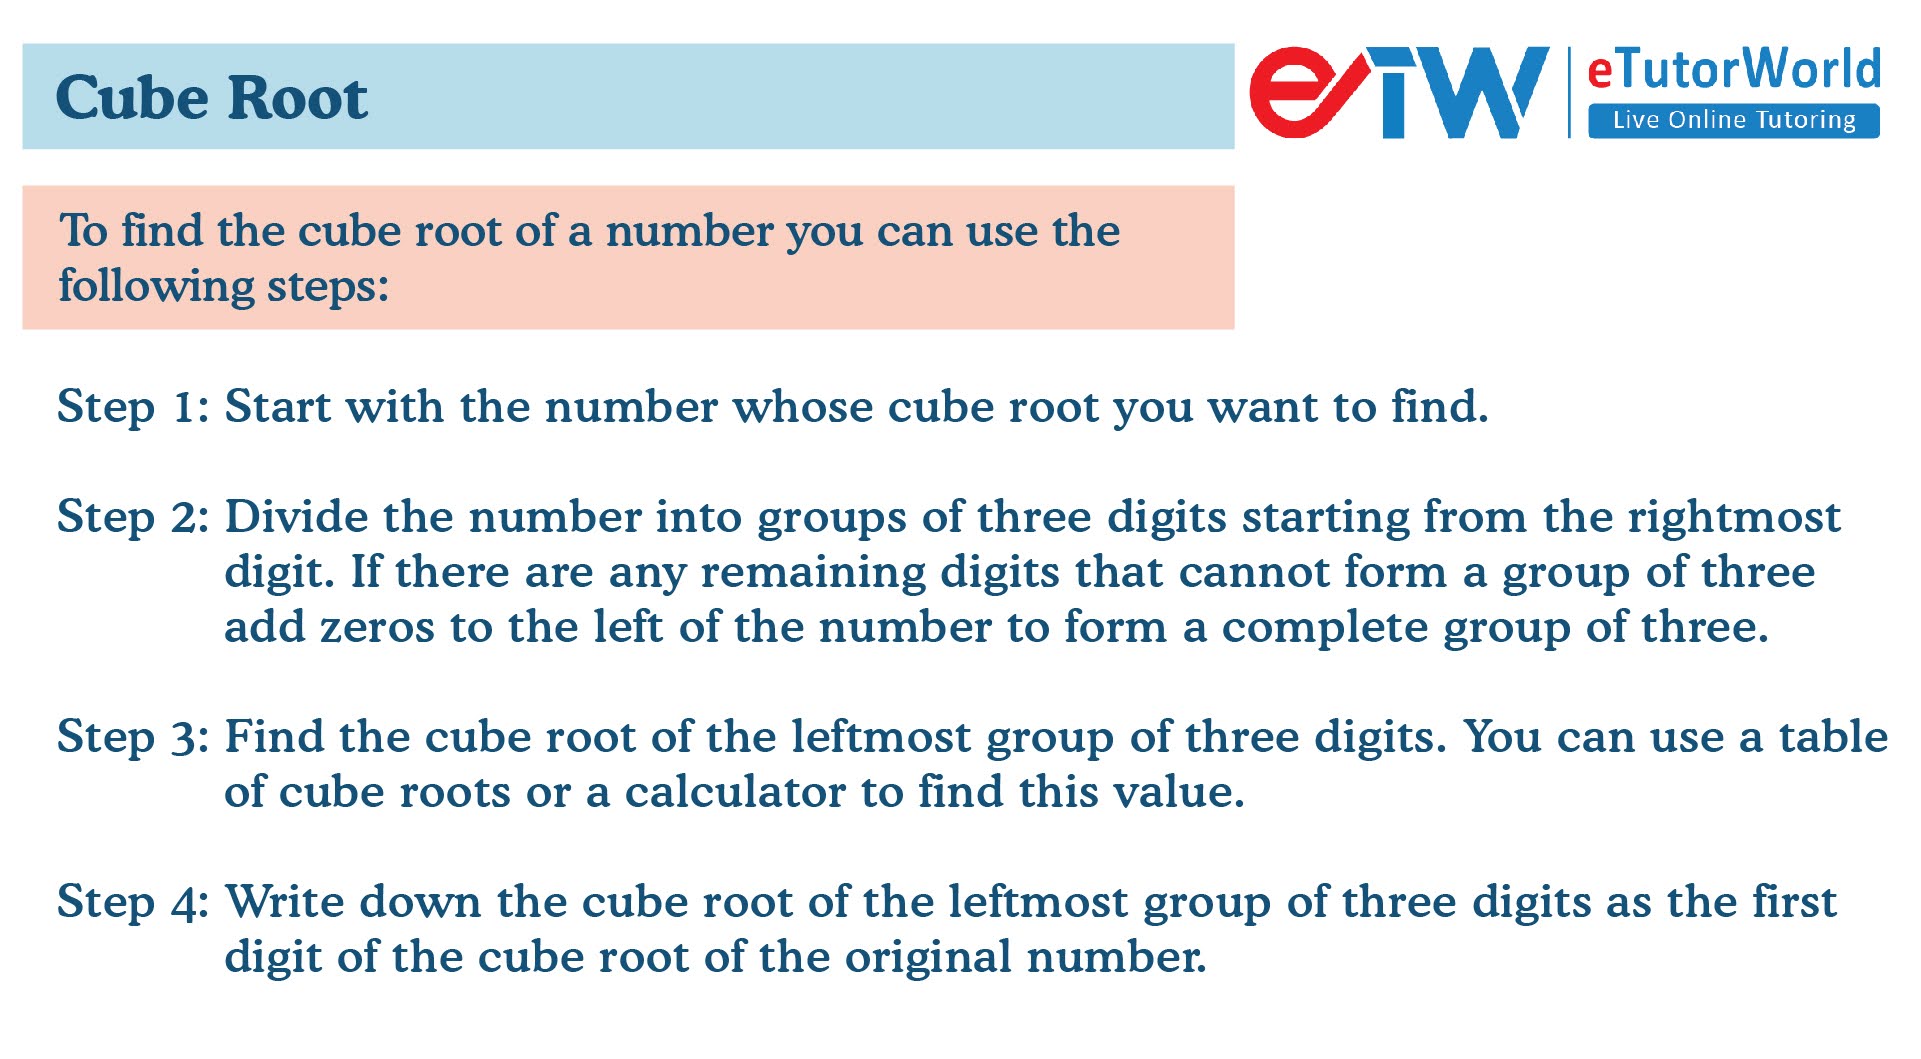 steps to find the cube root